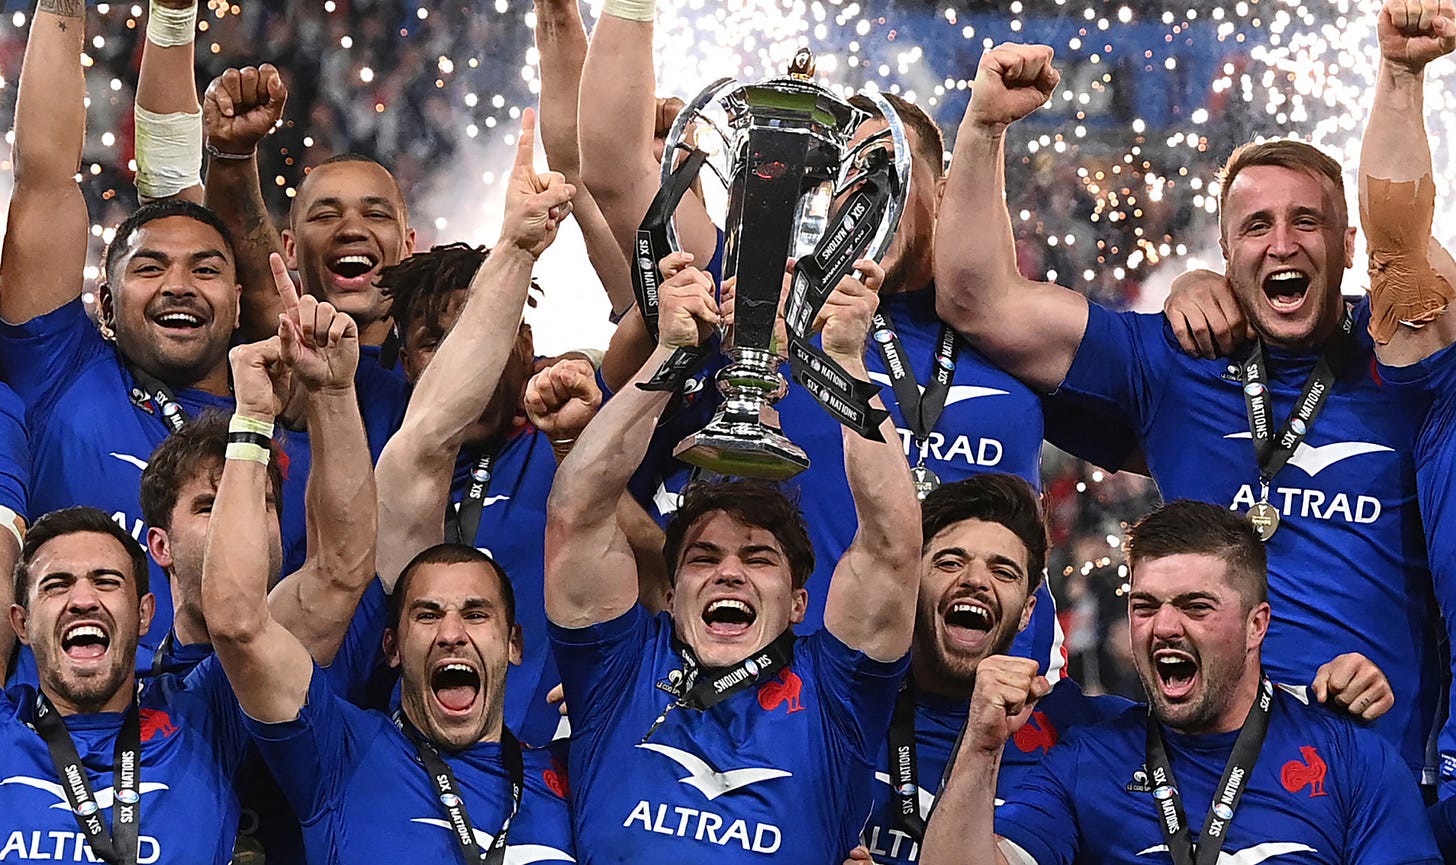 France's Grand Slam success comes in the build-up to their 2023 Rugby World Cup hosting ©Getty Images